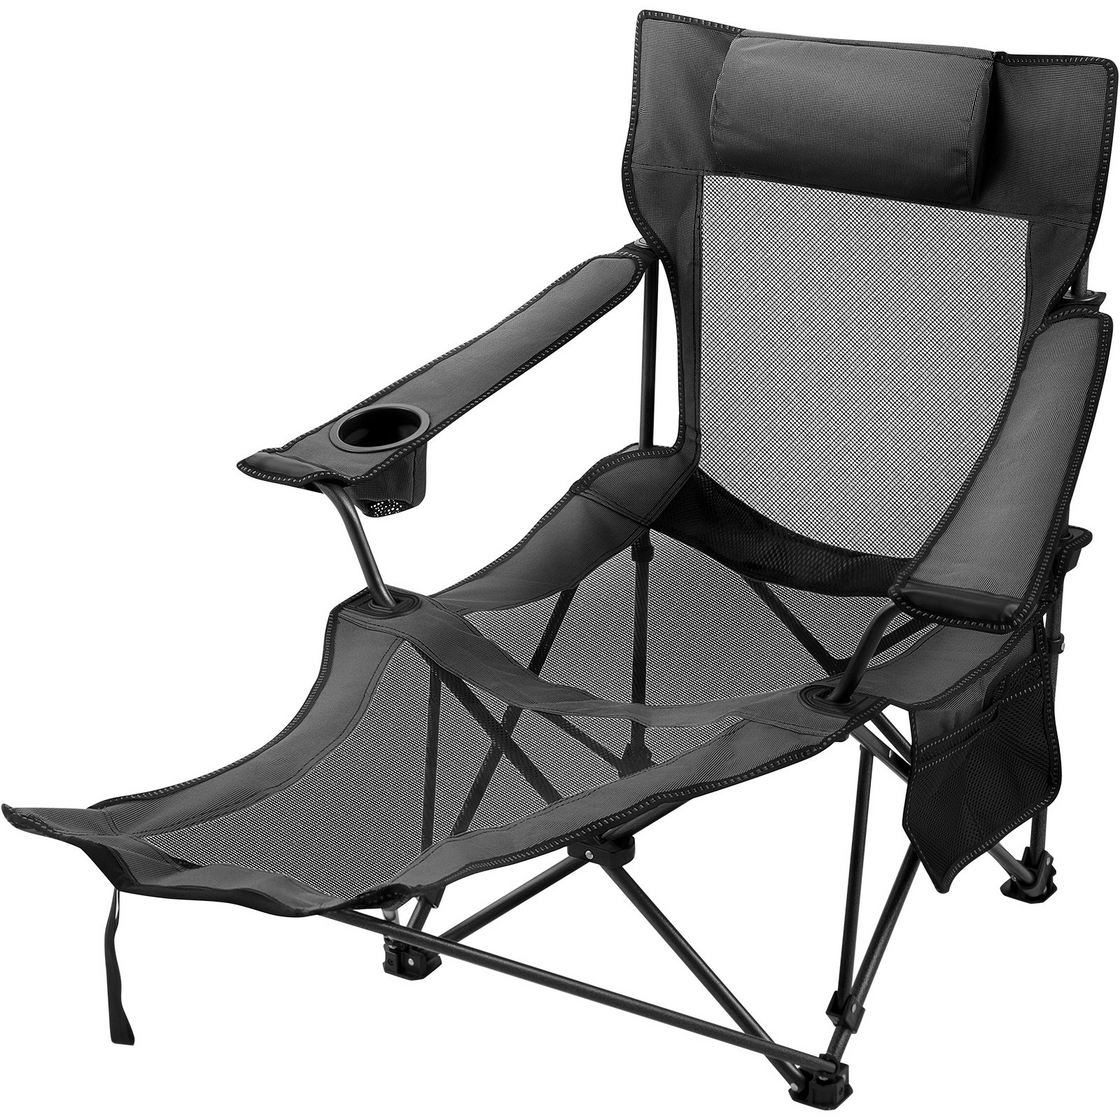 VEVOR Folding Camp Chair with Footrest Mesh, Portable Lounge Chair with Cup Holder and Storage Bag, for Camping Fishing and Other Outdoor Activities (Grey)